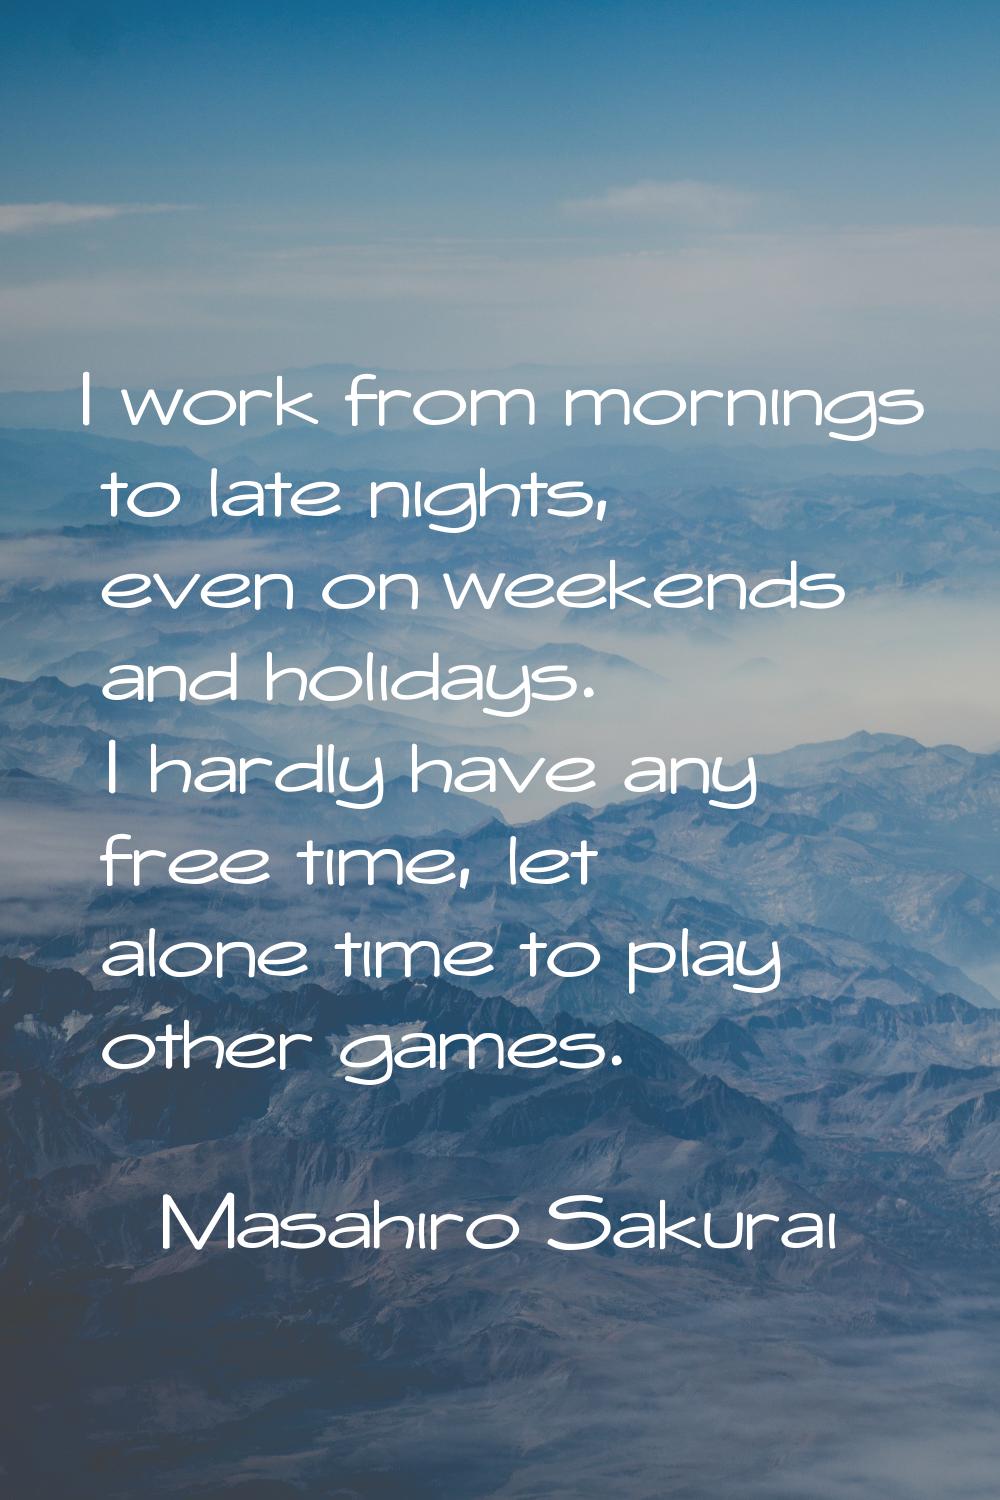 I work from mornings to late nights, even on weekends and holidays. I hardly have any free time, le